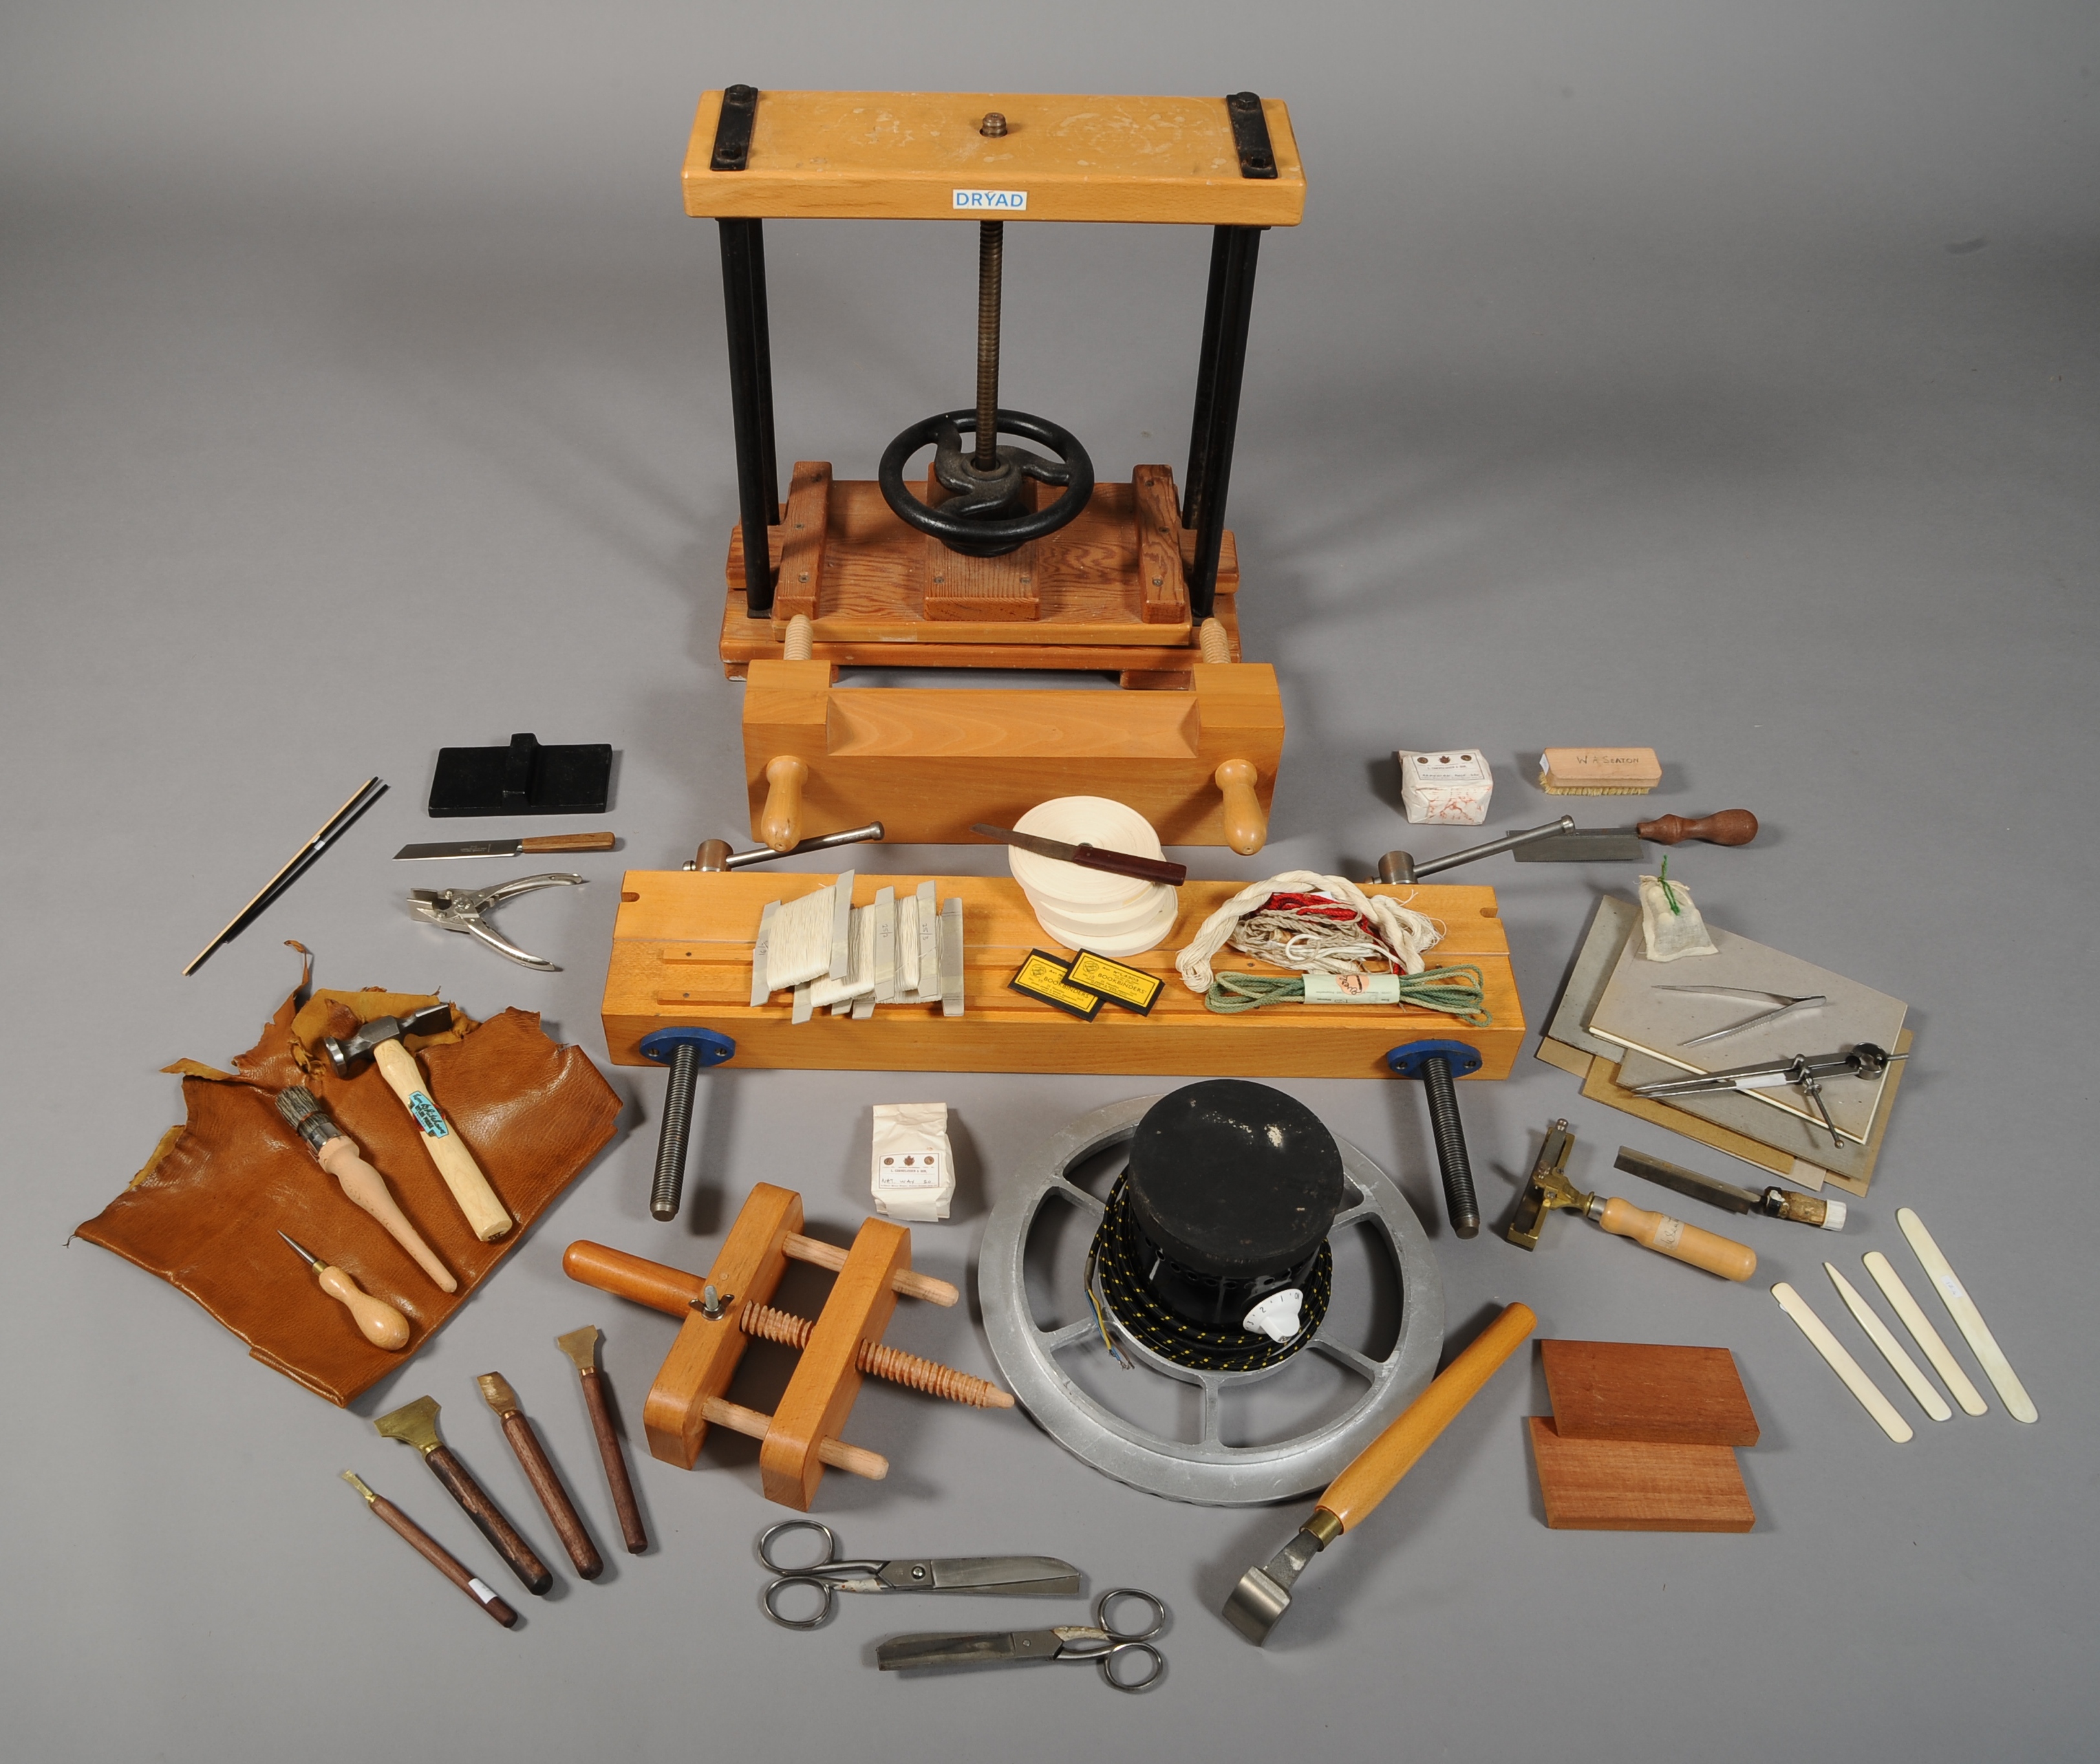 A COMPREHENSIVE COLLECTION OF BOOKBINDING EQUIPMENT, INCLUDING: Dryad book press, large laying